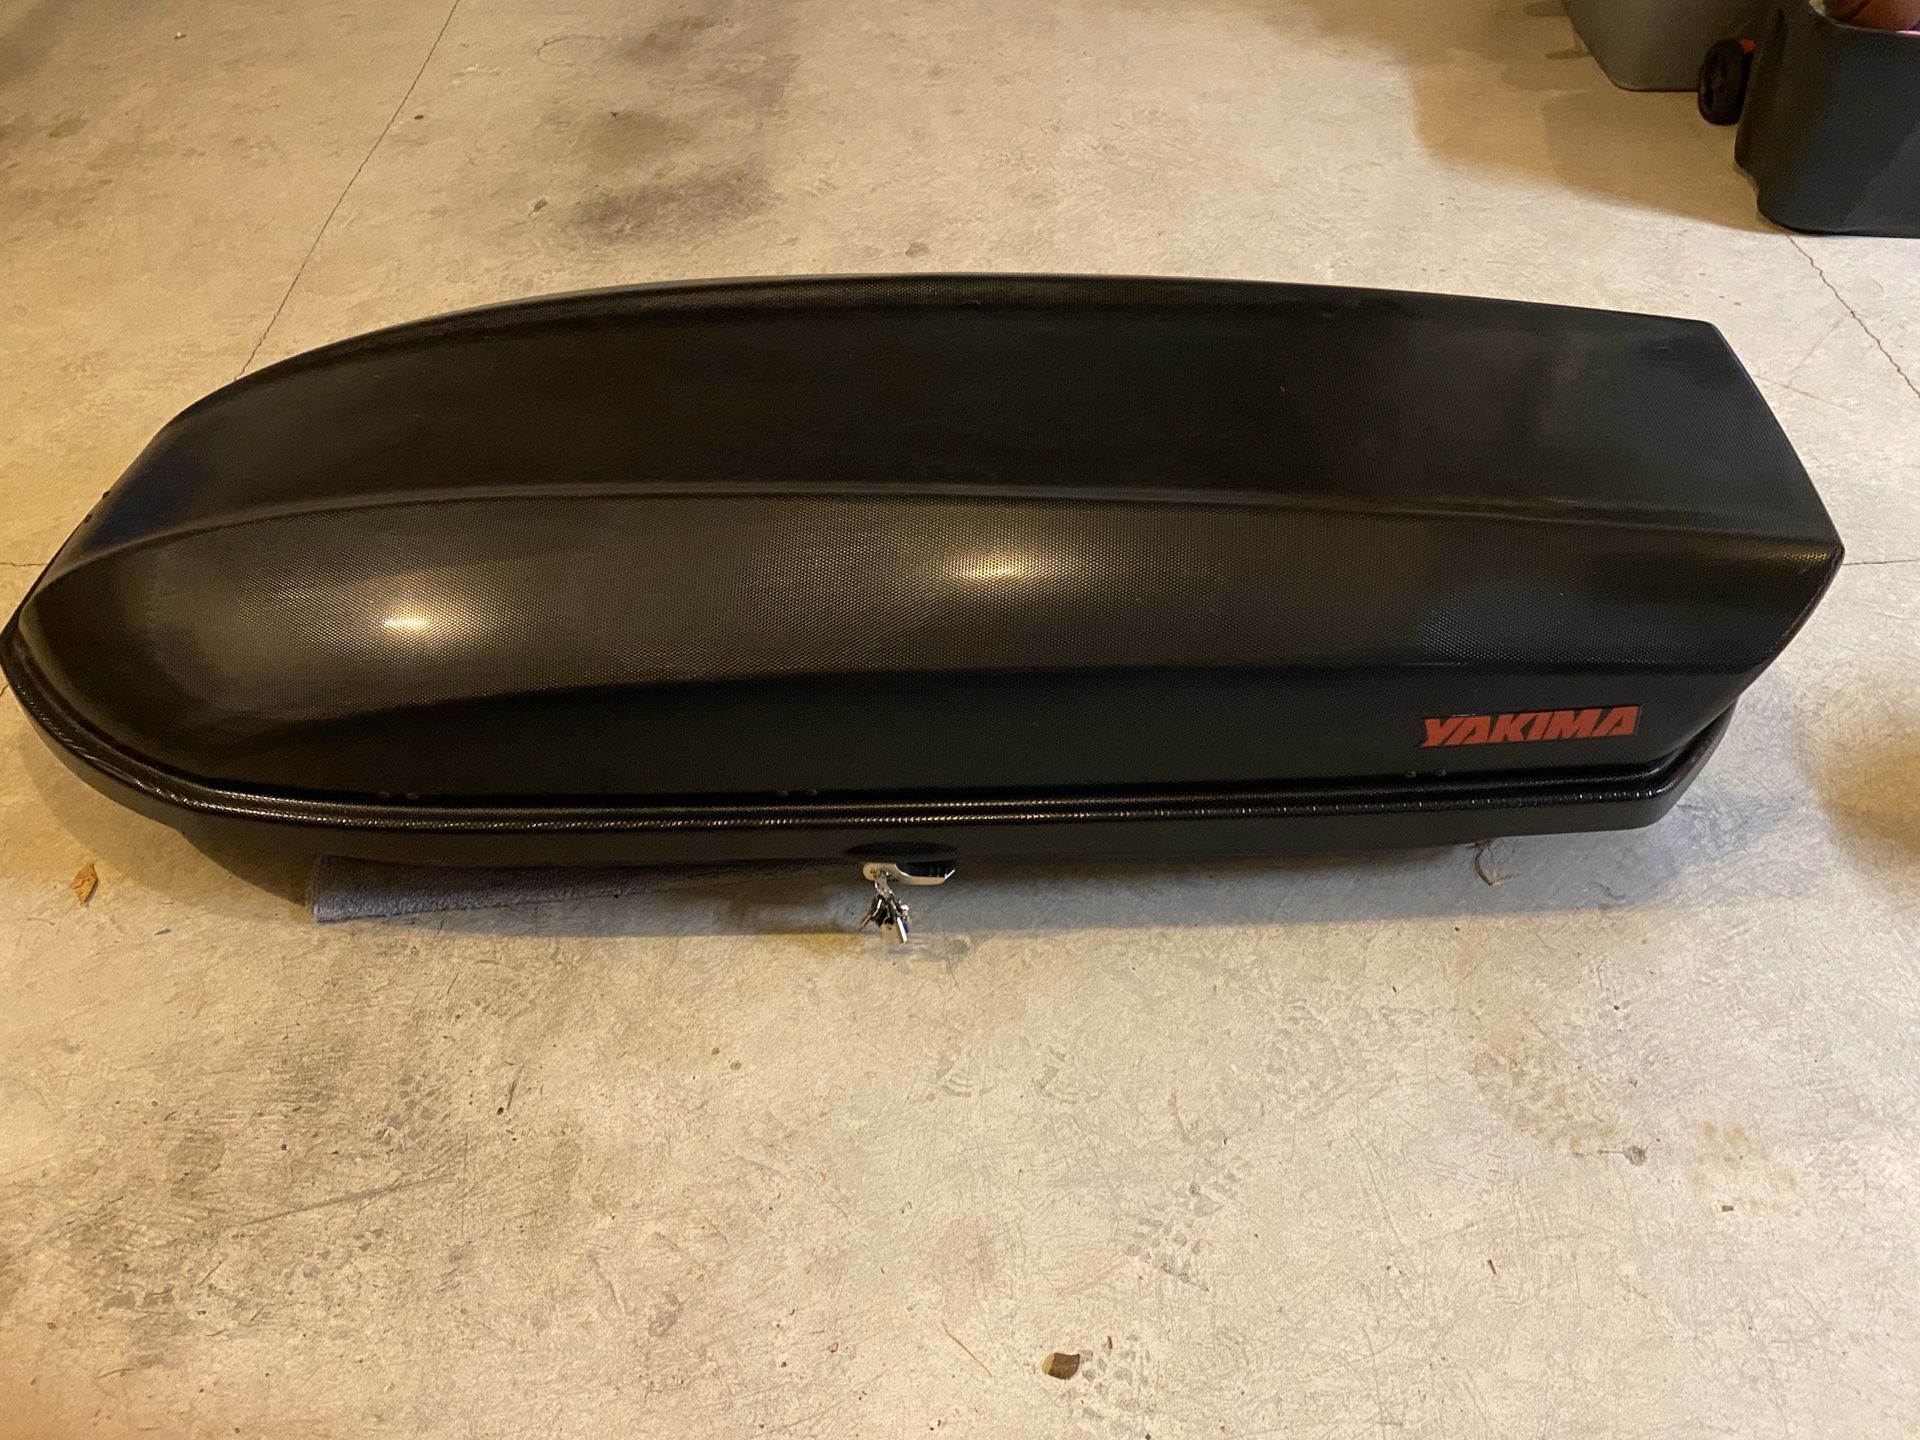 Yakima Carbonite Skybox 16 / Cargo Box- Excellent Condition. Nearly New